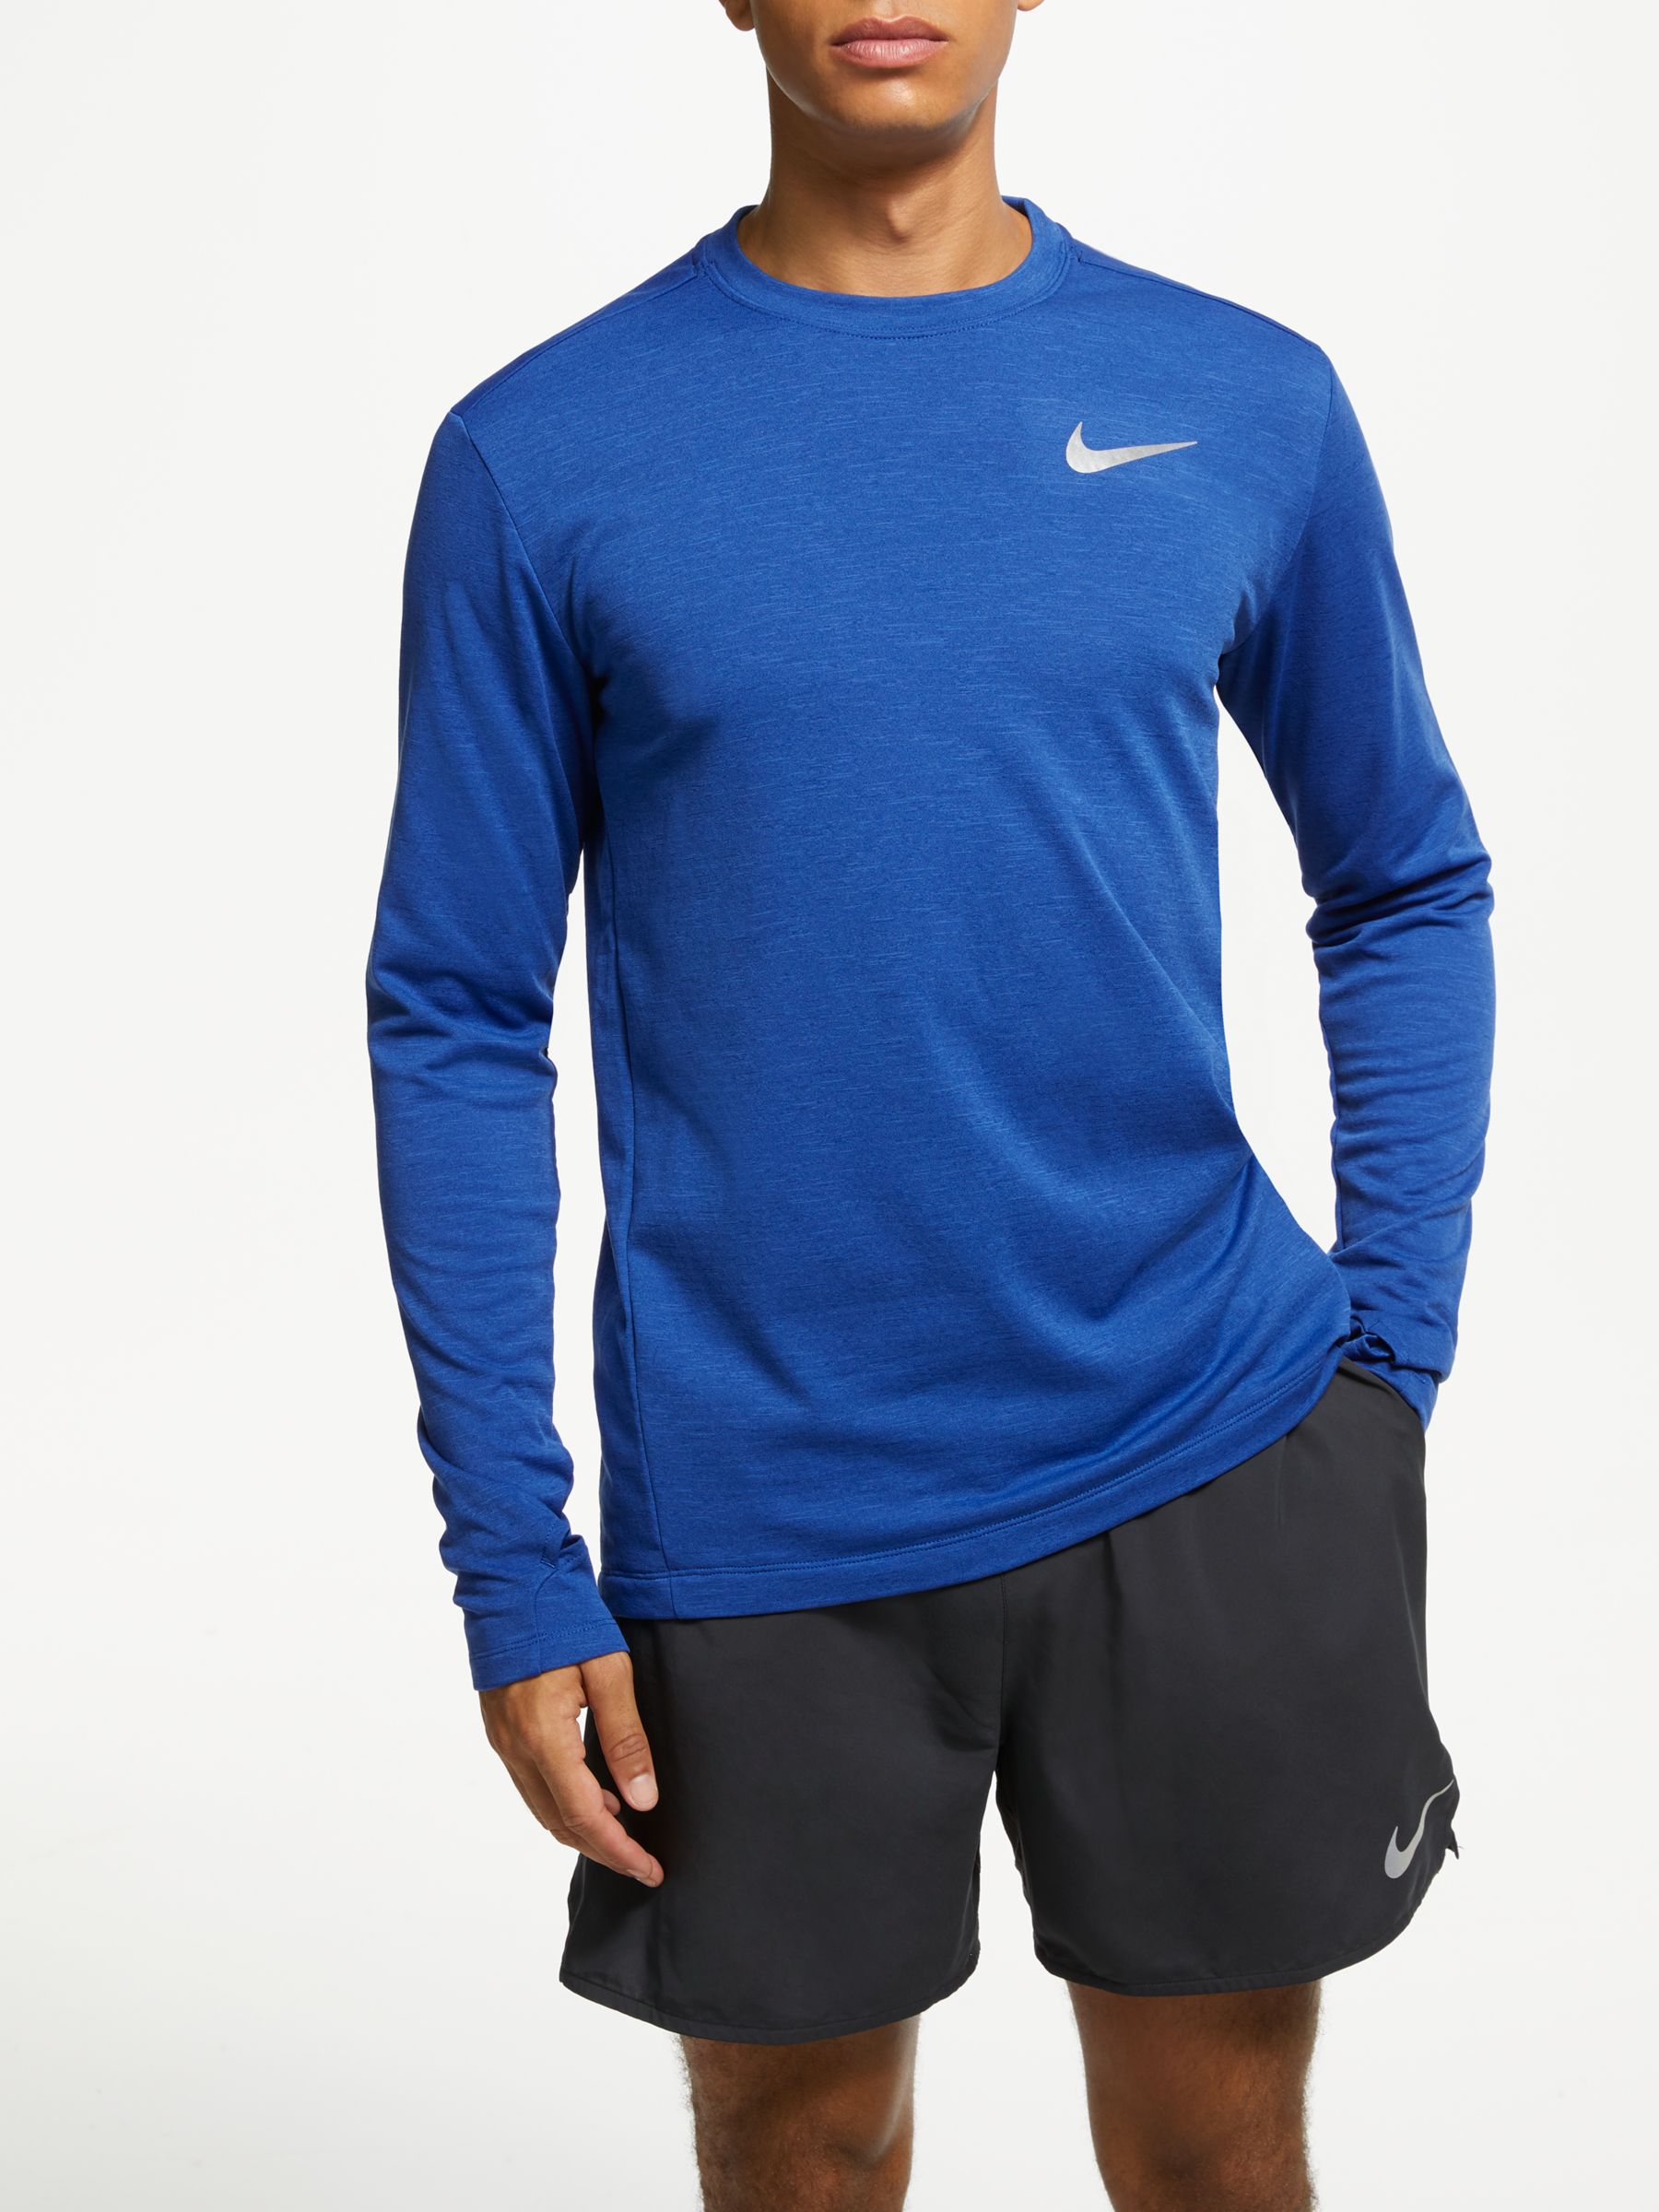 Nike Therma Element Long Running Top, Blue Void